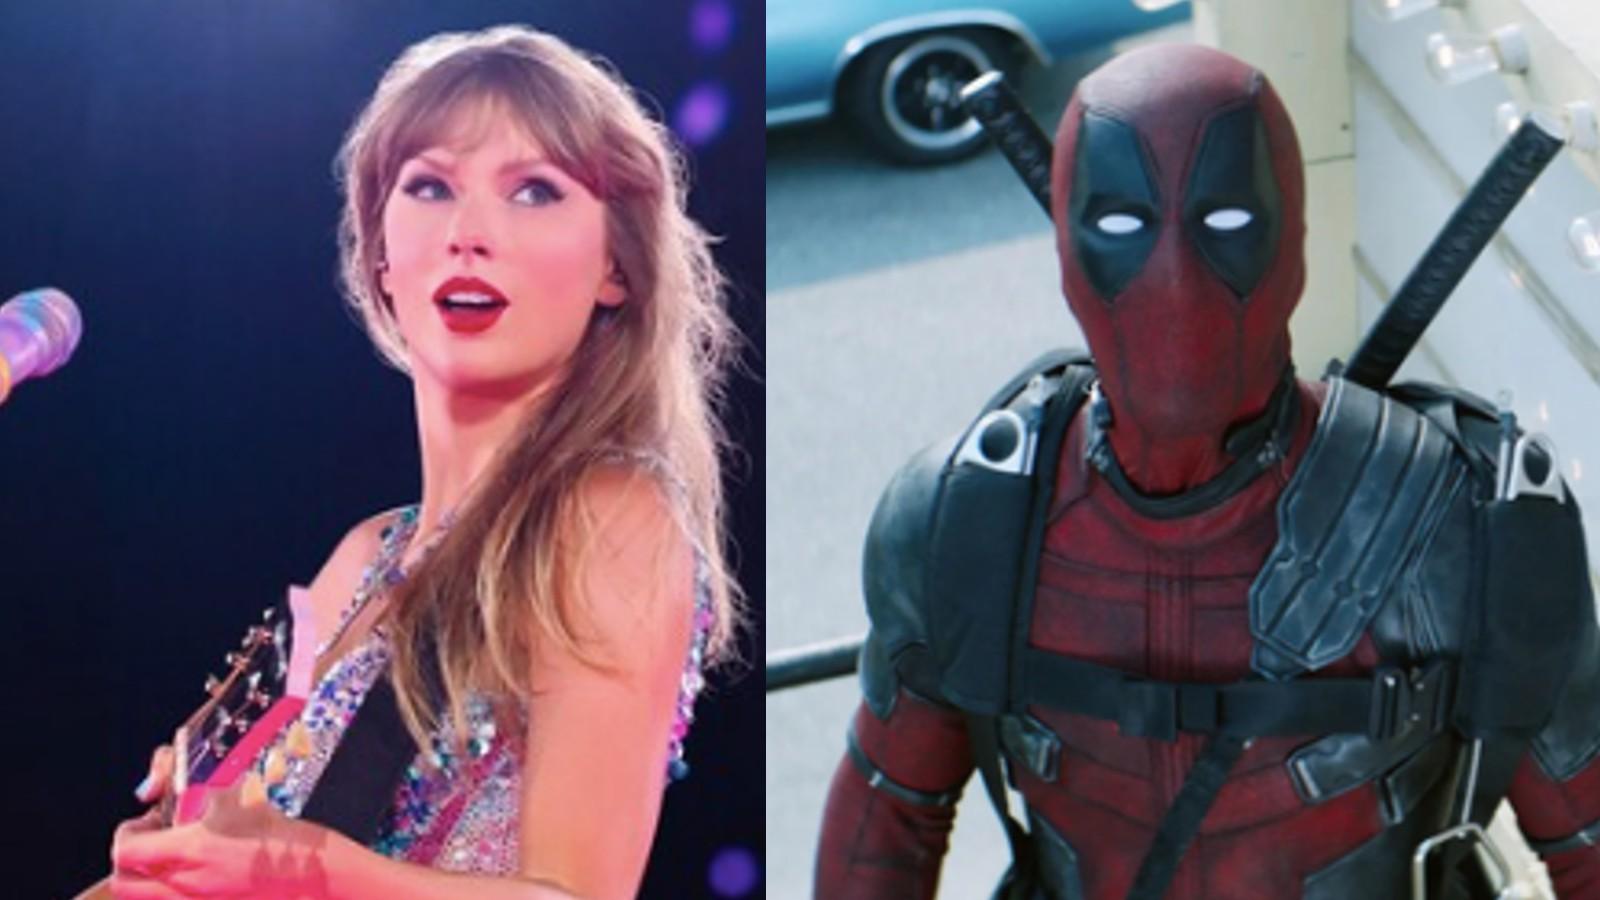 Taylor Swift in concert and Deadpool